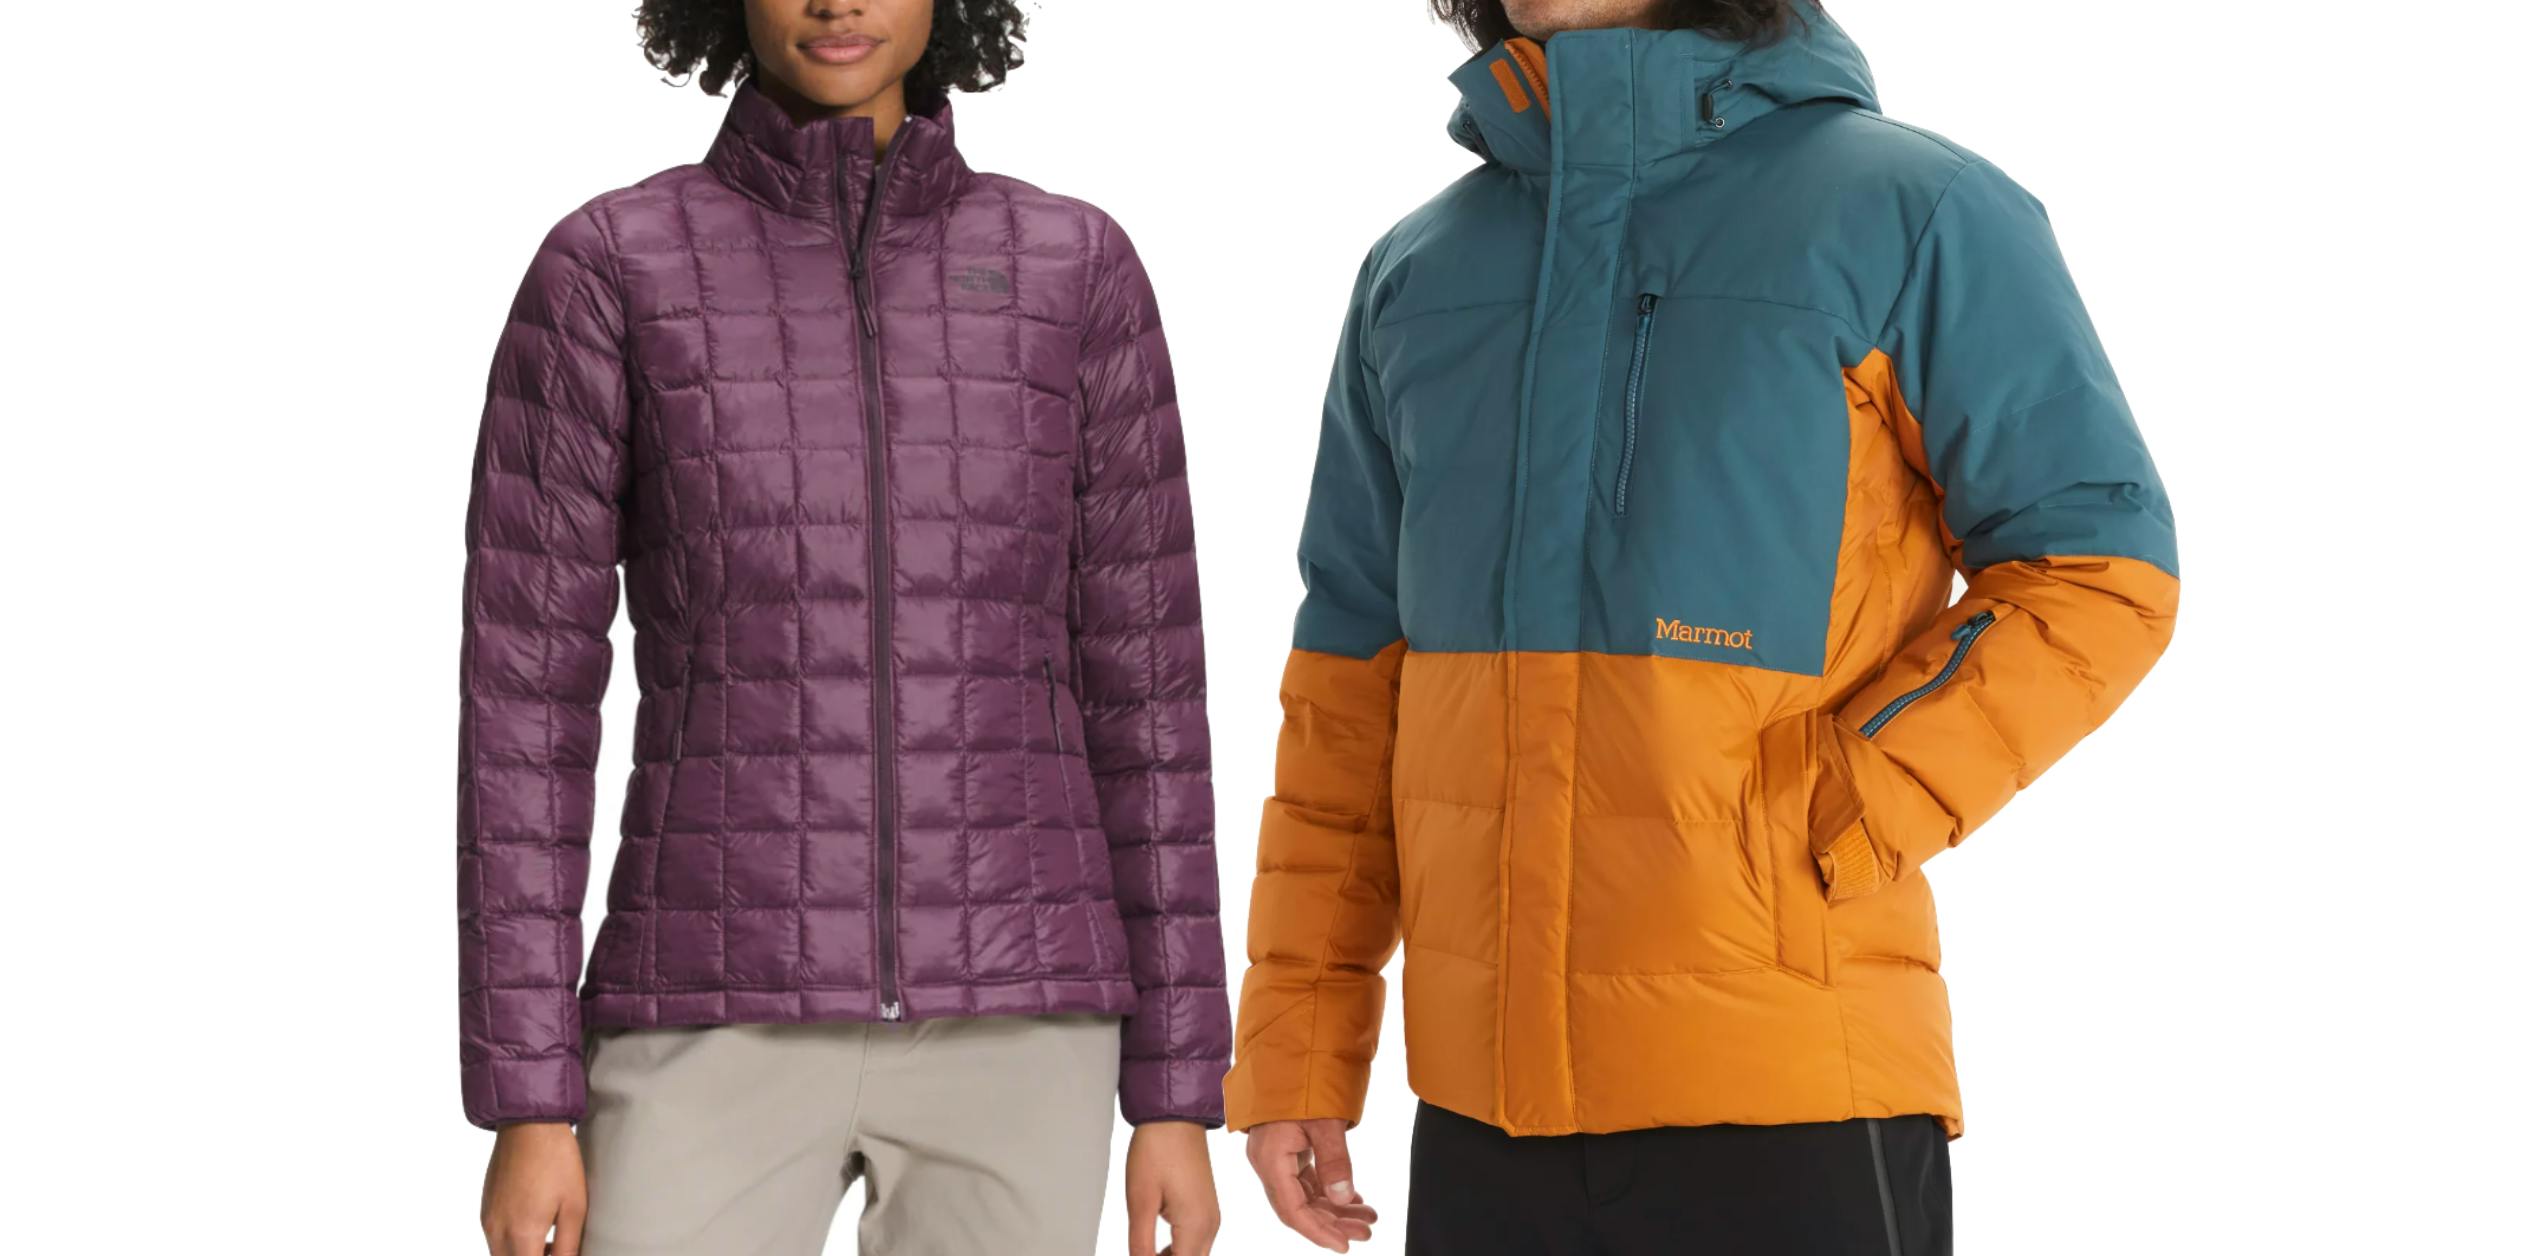 Product images of the The North Face Women’s Thermoball Eco Jacket and the Marmot Men’s Shadow Jacket.